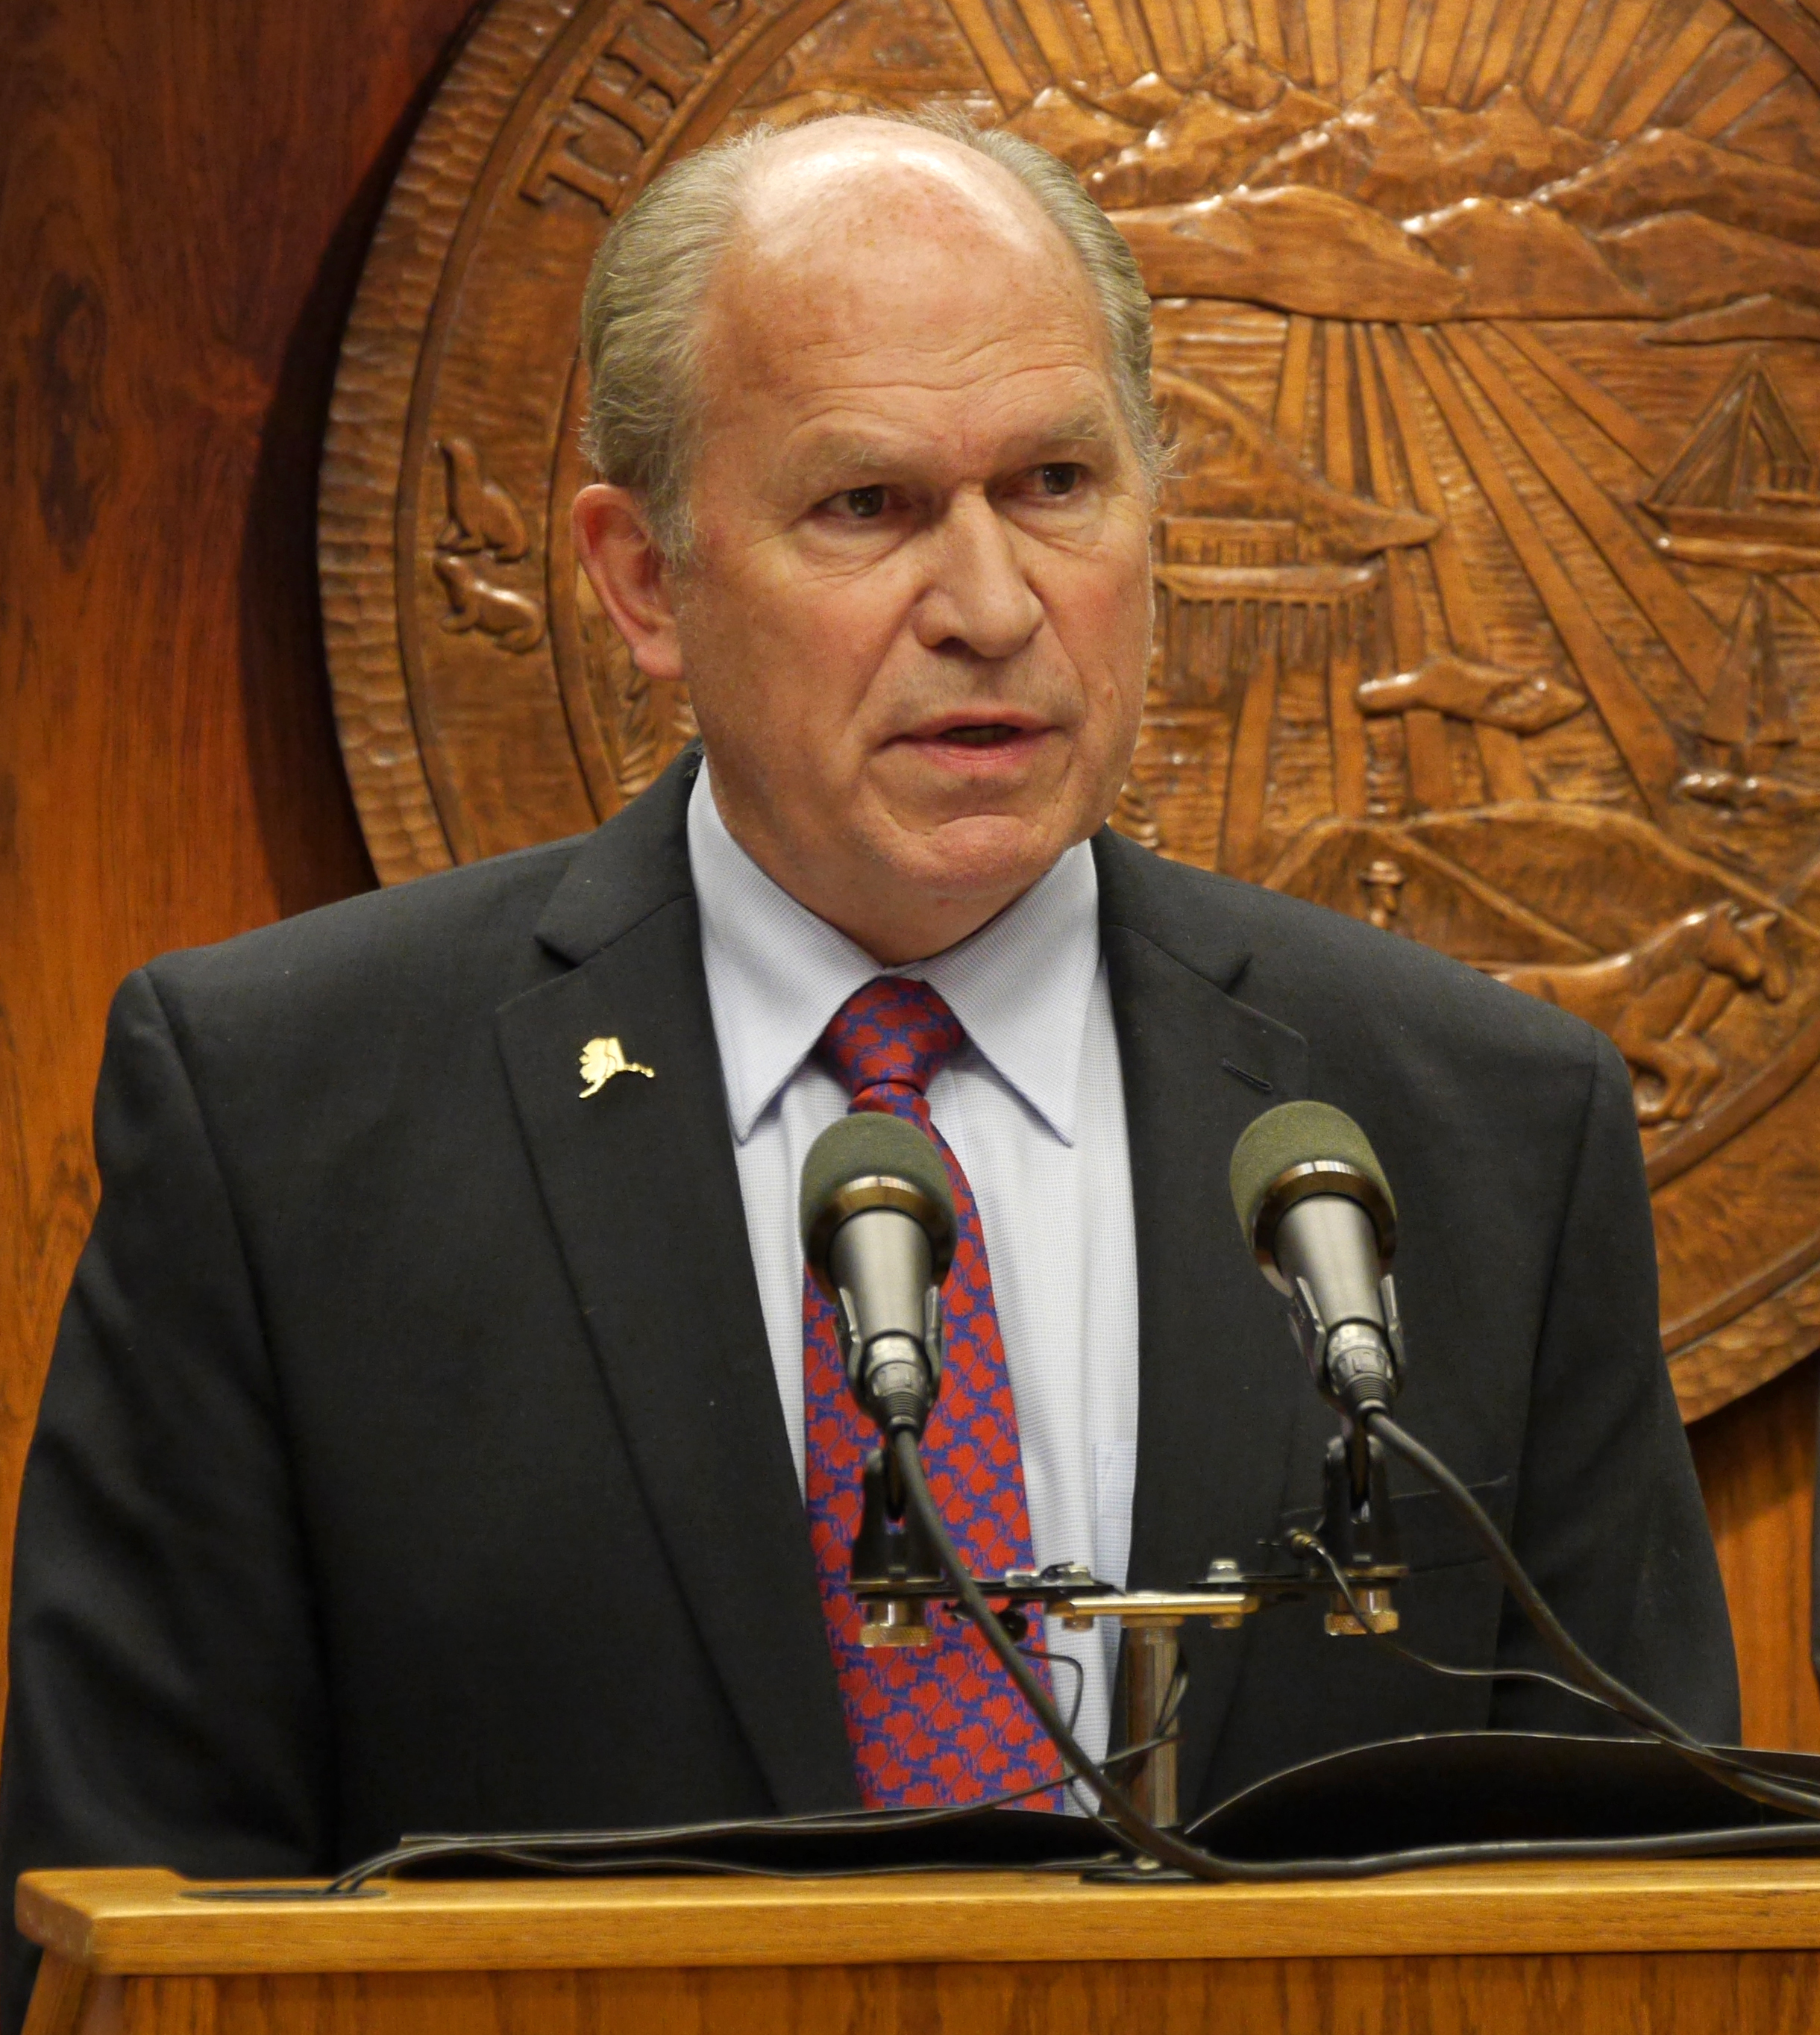 Gov. Bill Walker at a press availability, January 28, 2016. Walker has remained hopeful about the passing of an oil and gas tax bill. (File photo by Skip Gray, 360 North)